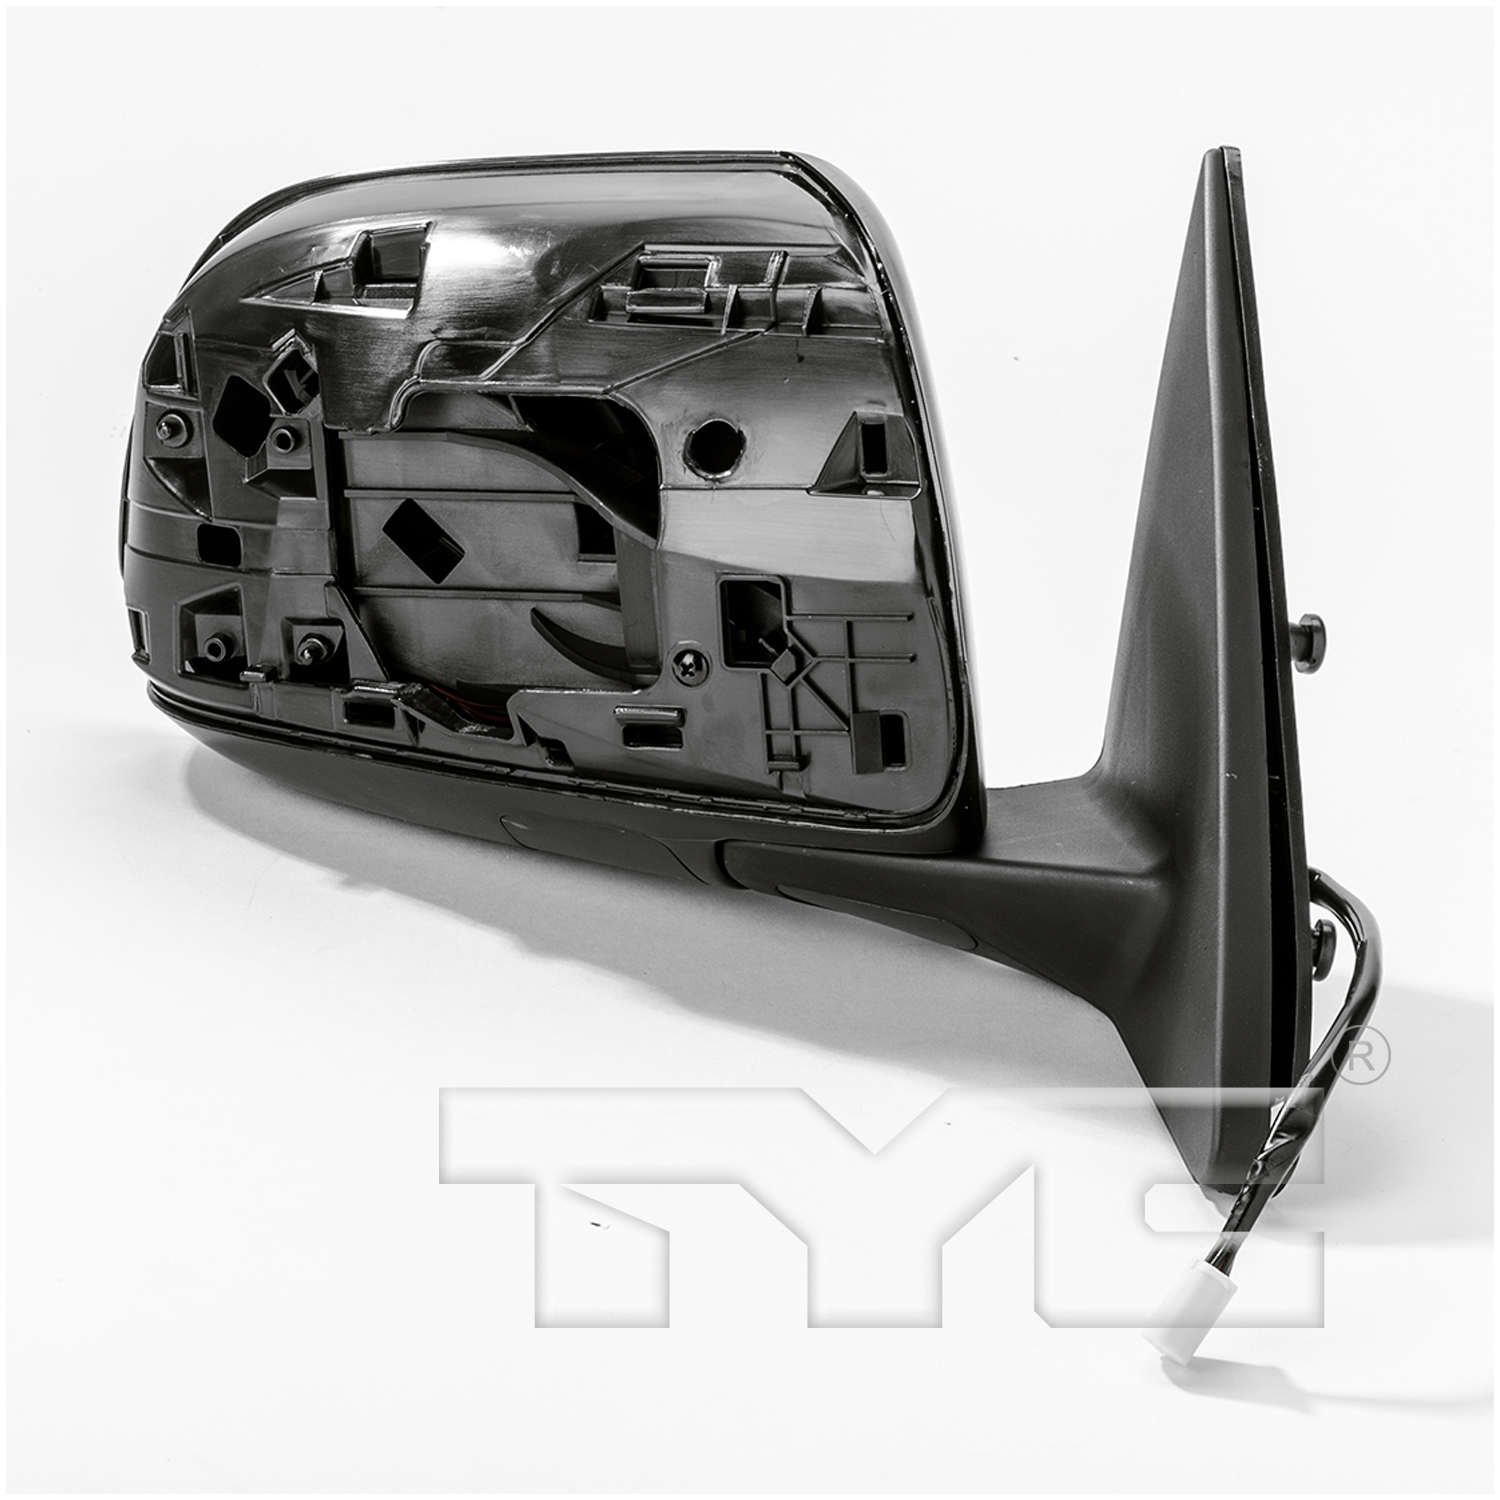 Aftermarket MIRRORS for TOYOTA - HIGHLANDER, HIGHLANDER,08-10,RT Mirror outside rear view